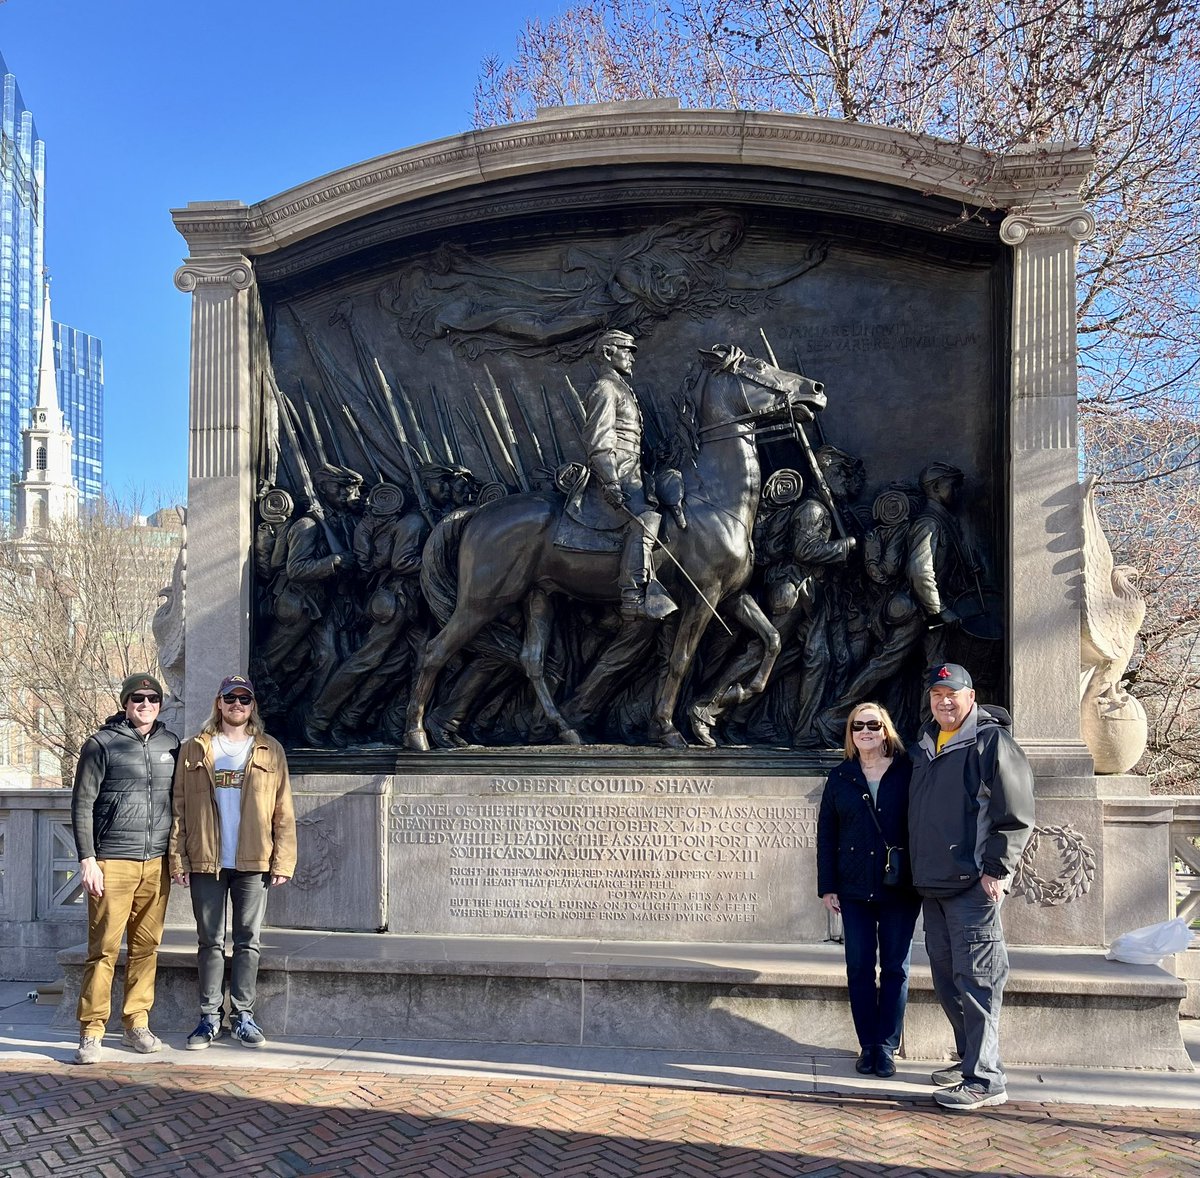 Yes, I made my family stop and take a picture at the 54th Mass monument.